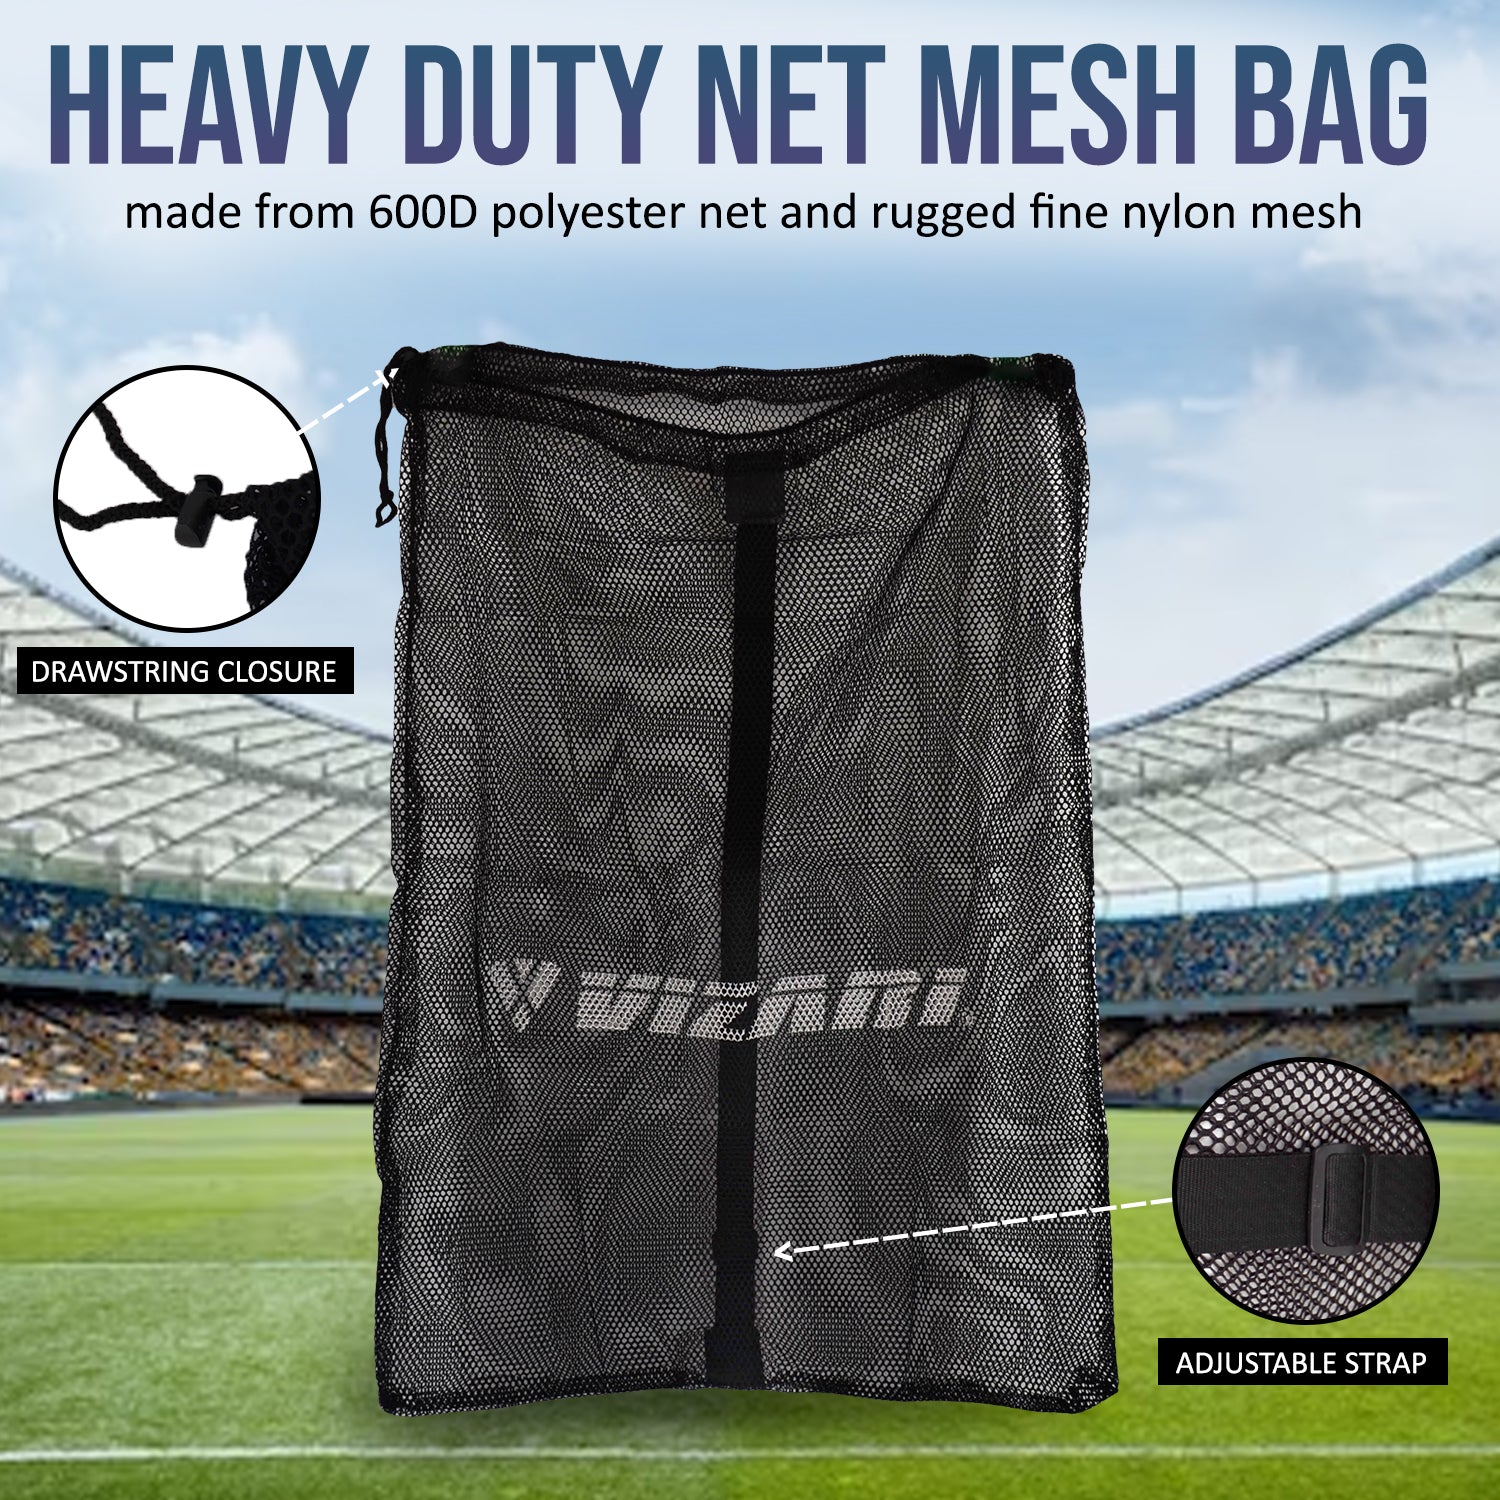  VVWAYSE Ball Storage Mesh Soccer Ball Bag Holder Heavy Duty  Drawstring Bags Team Work for Basketball, Volleyball, Baseball, Swimming  Gear With Shoulder Strap, Large Mesh Bags With Zipper : Sports